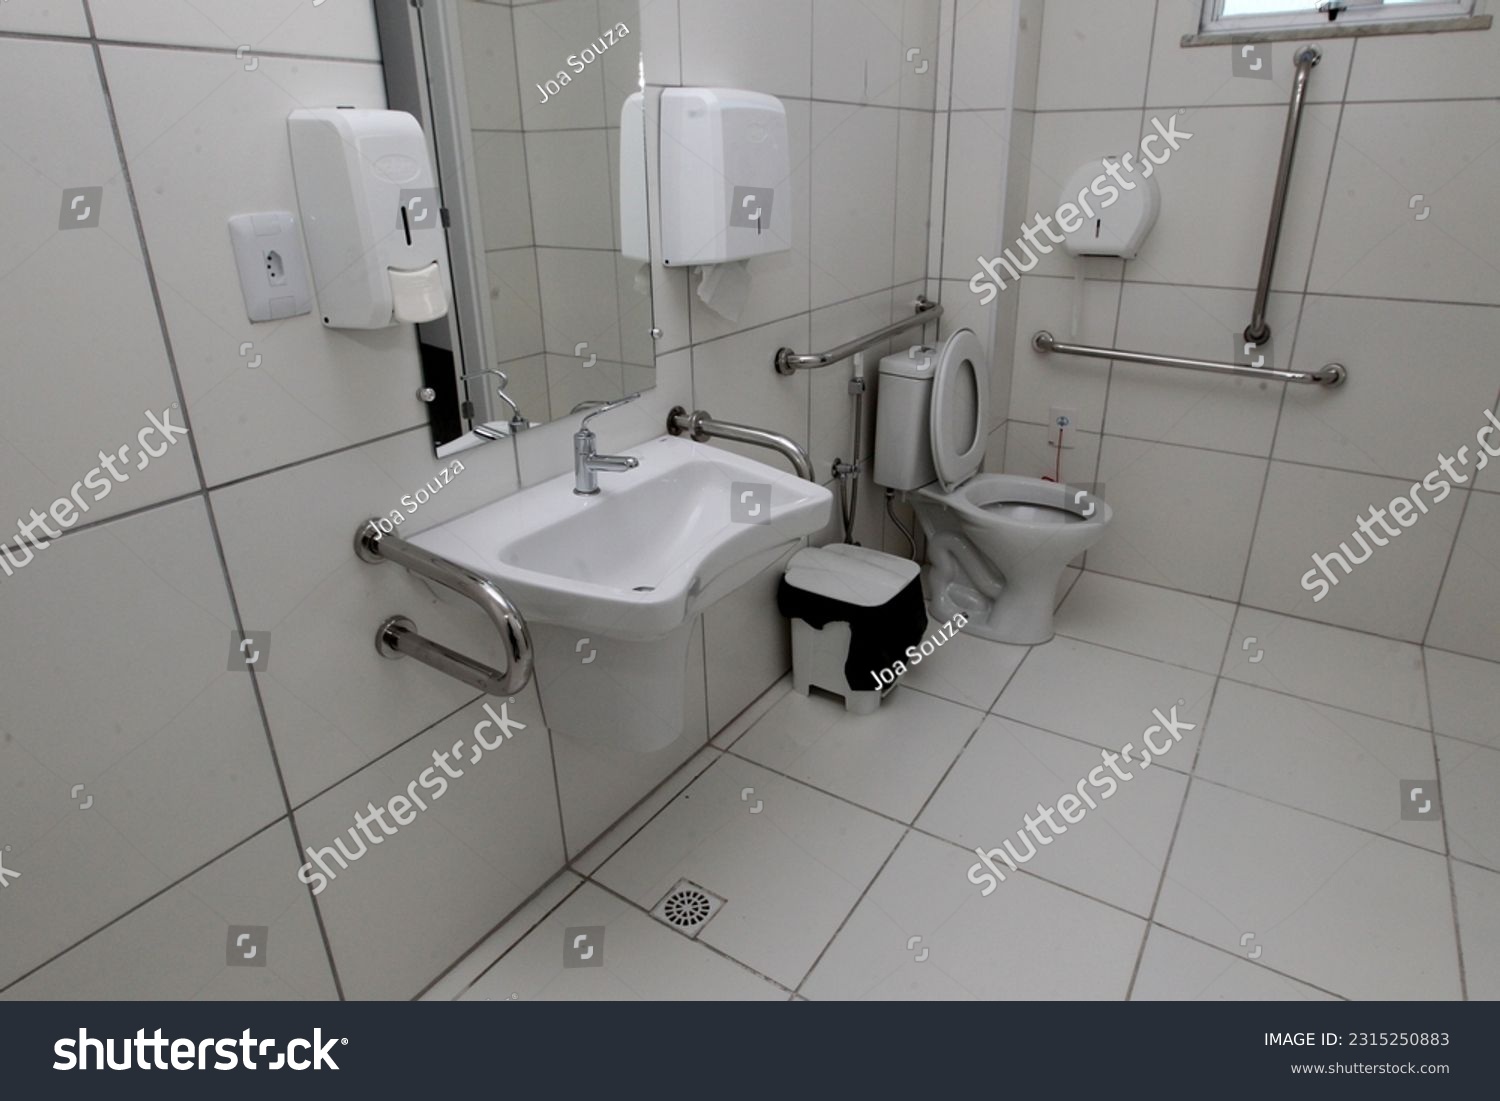 itaberaba, bahia, brazil - june 3, 2023: bathroom with handrail for accessibility in a public hospital in the city of Itaberaba. #2315250883